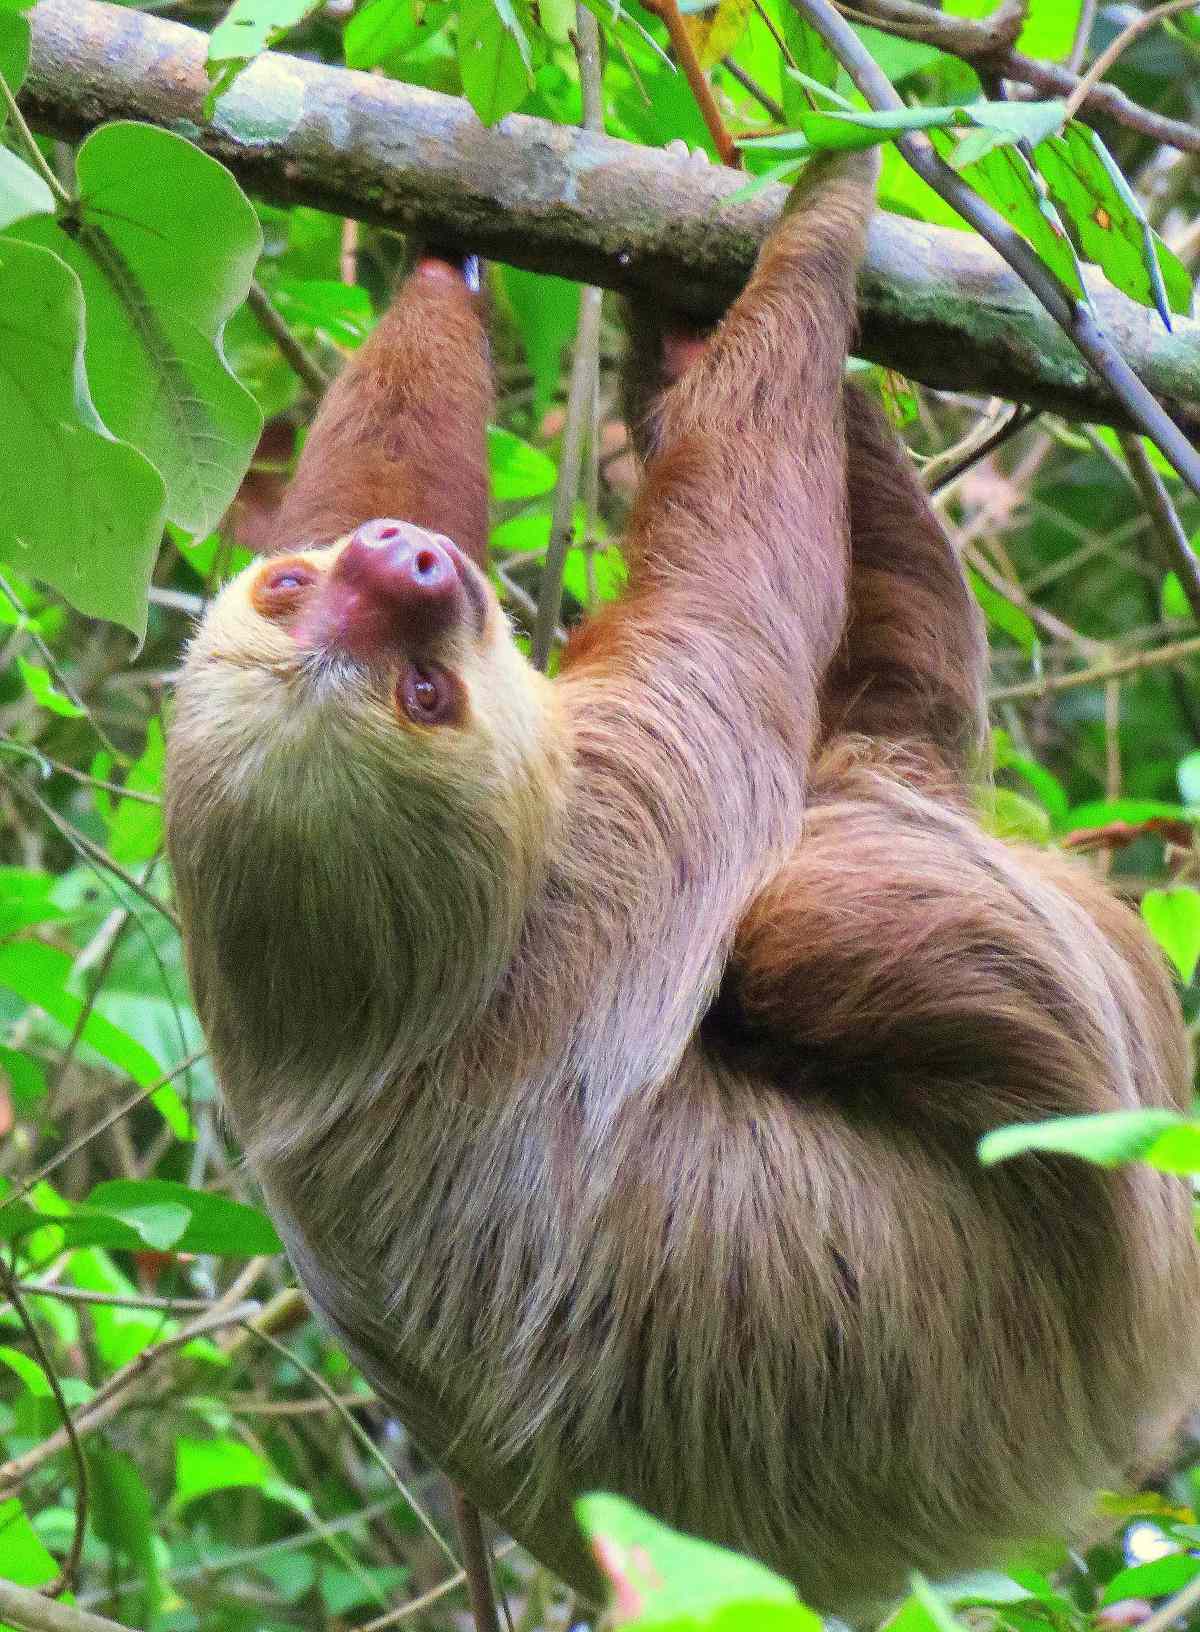 Sloth hanging from a tree, showing why they move so slowly